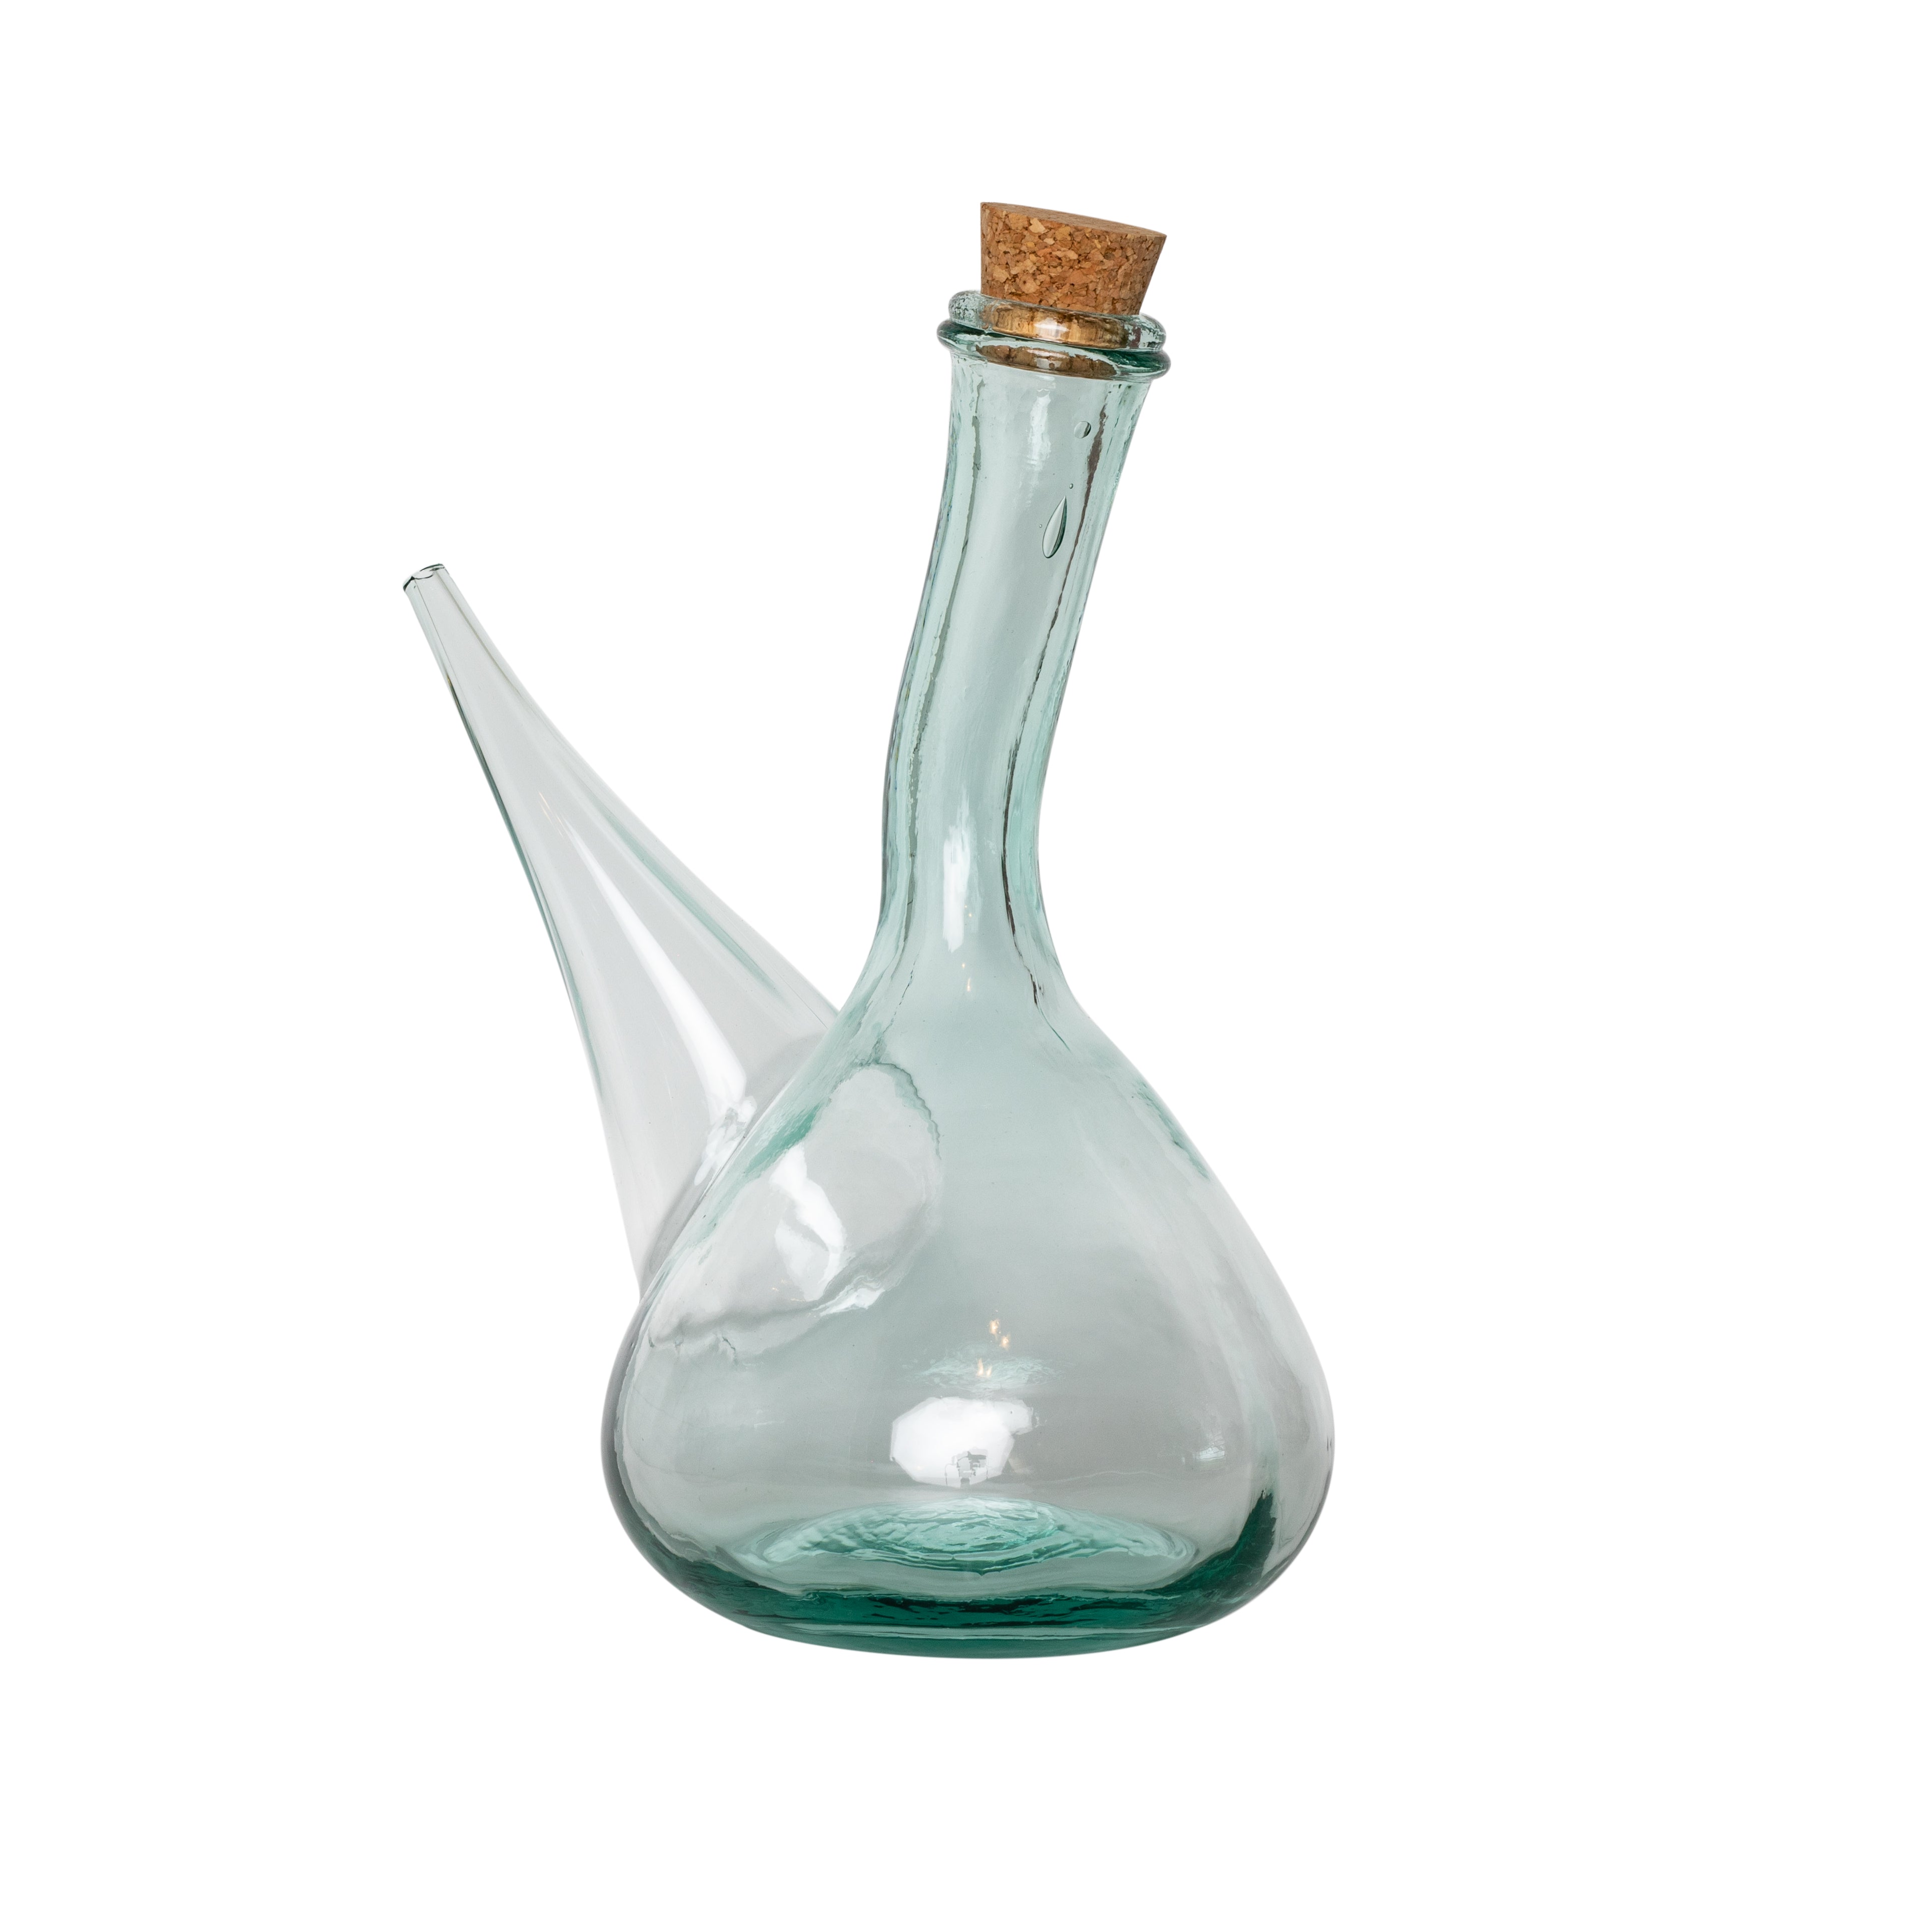 Brule Glass Wine Porron Pitcher, Imported Decanter from Spain 1